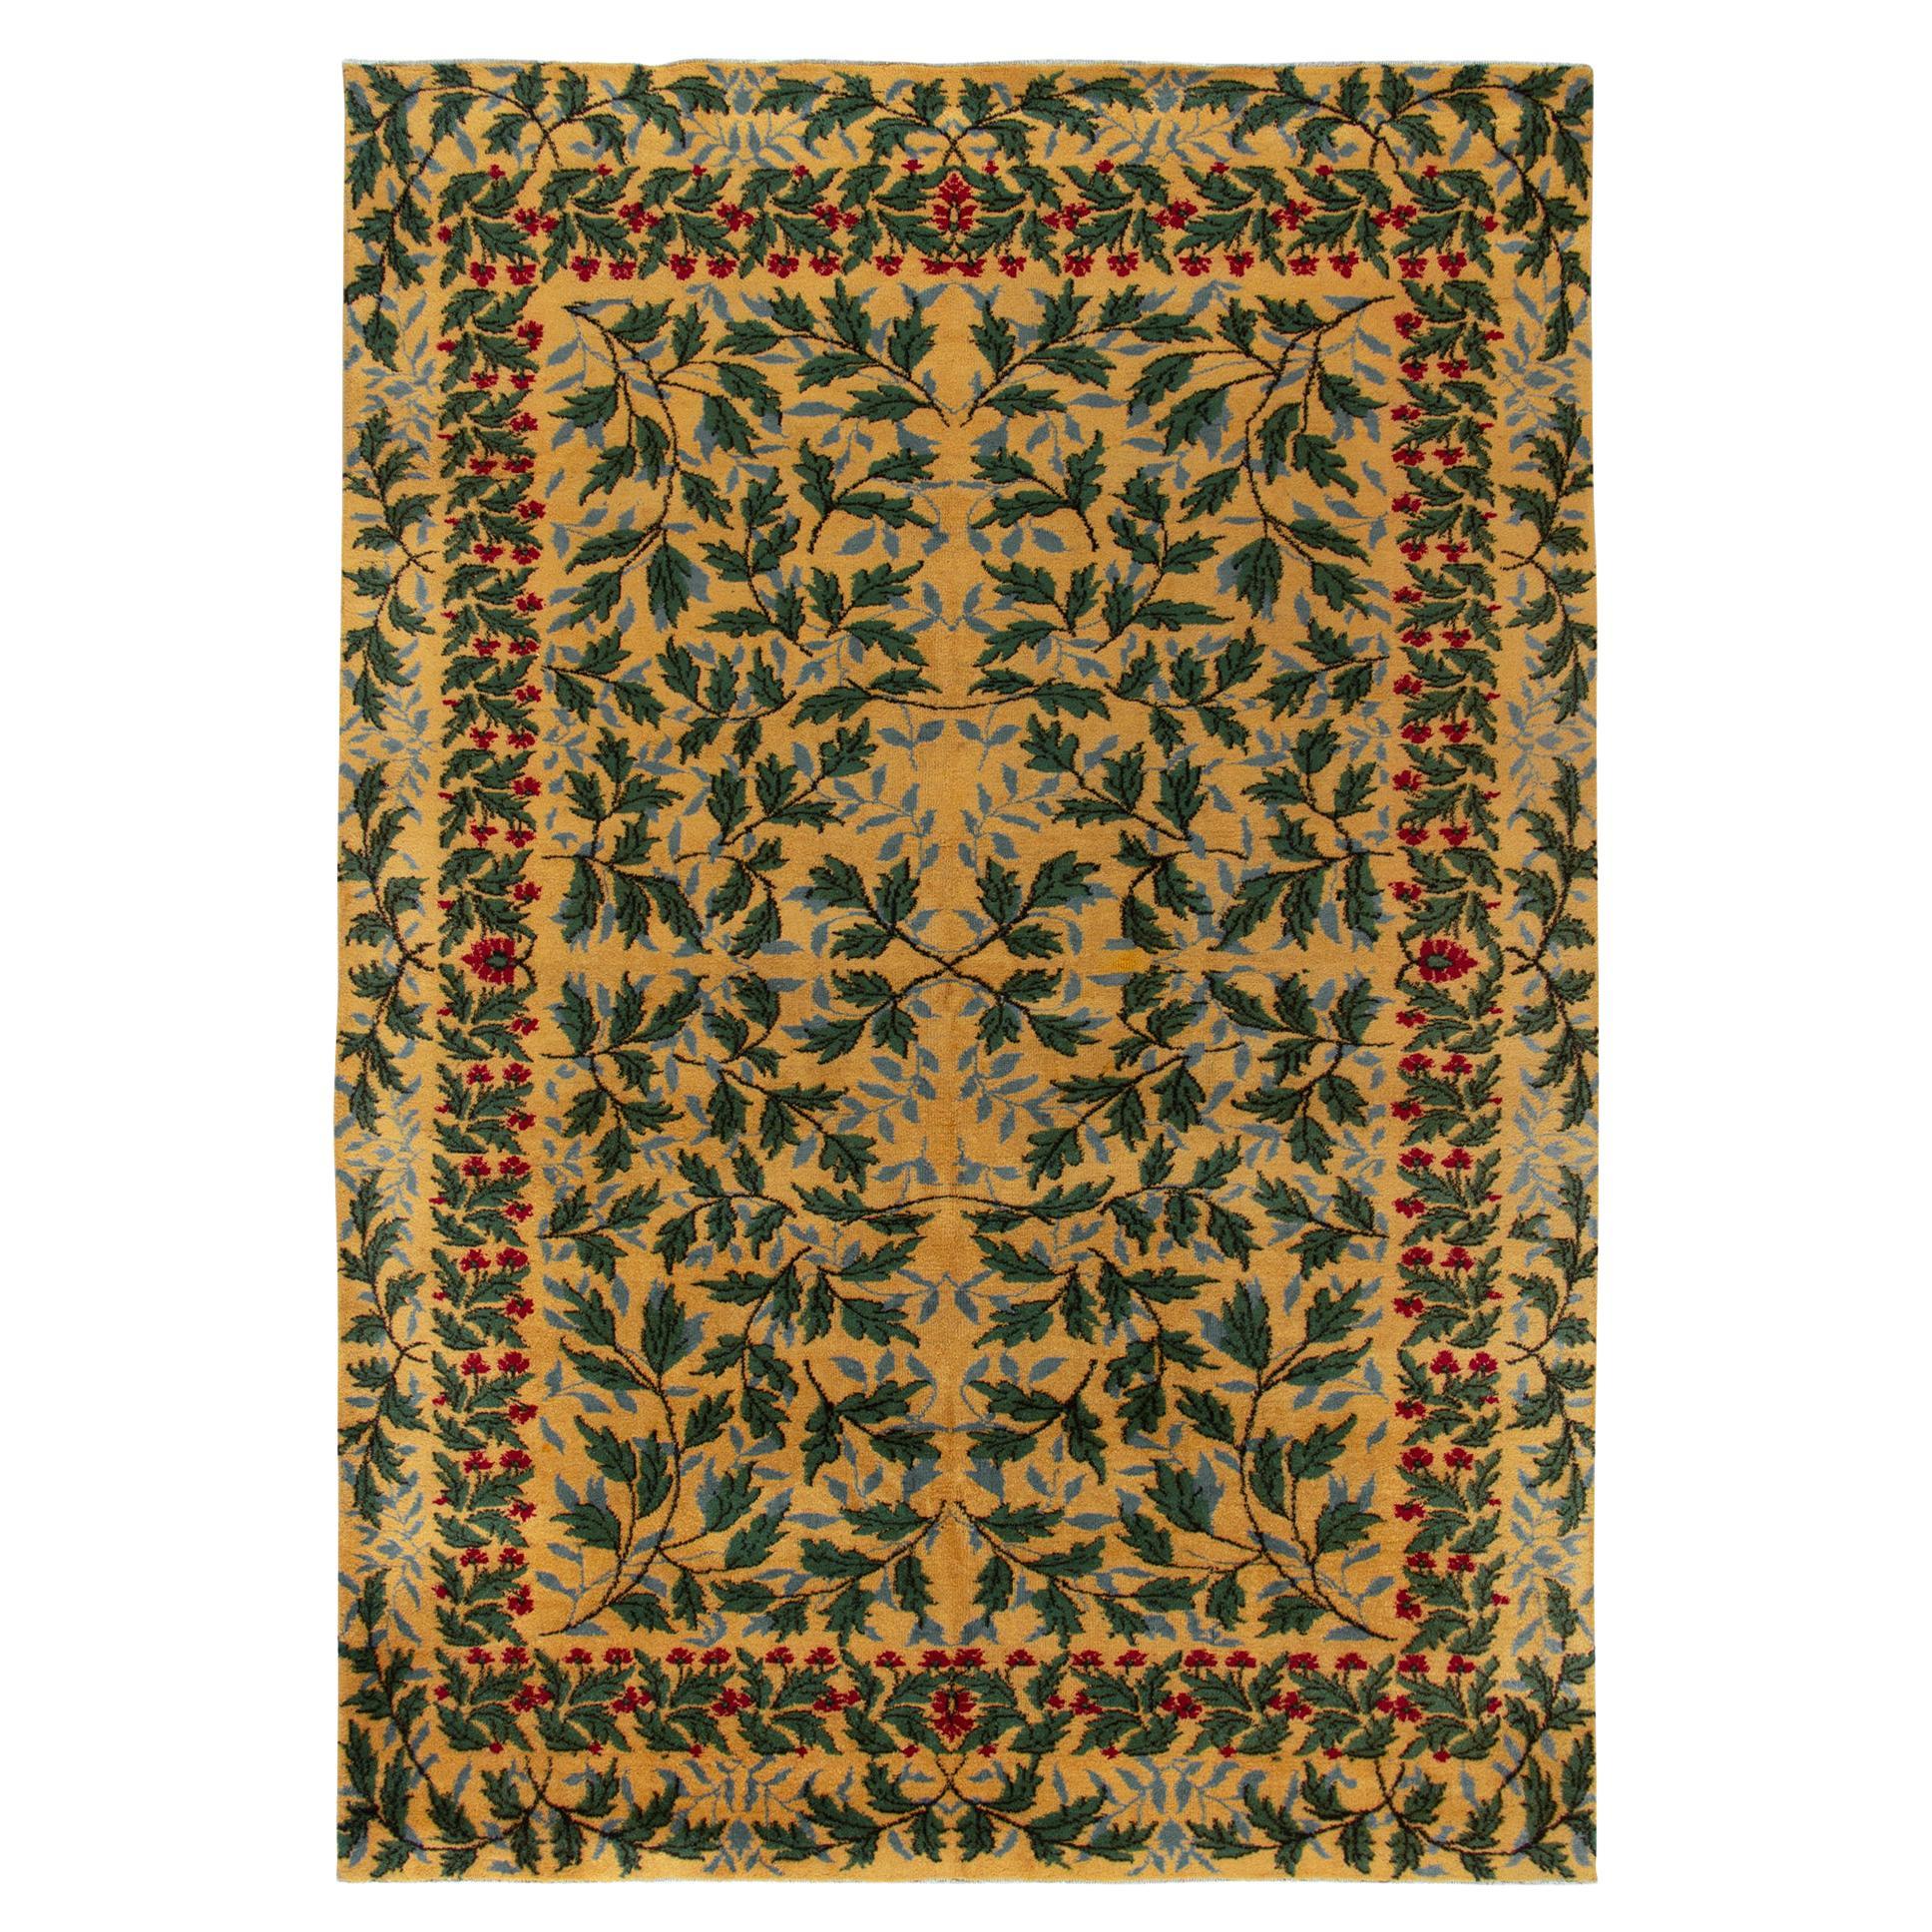 1960s Vintage Nouveau Style Rug in Gold, Green Floral Patterns by Rug & Kilim For Sale